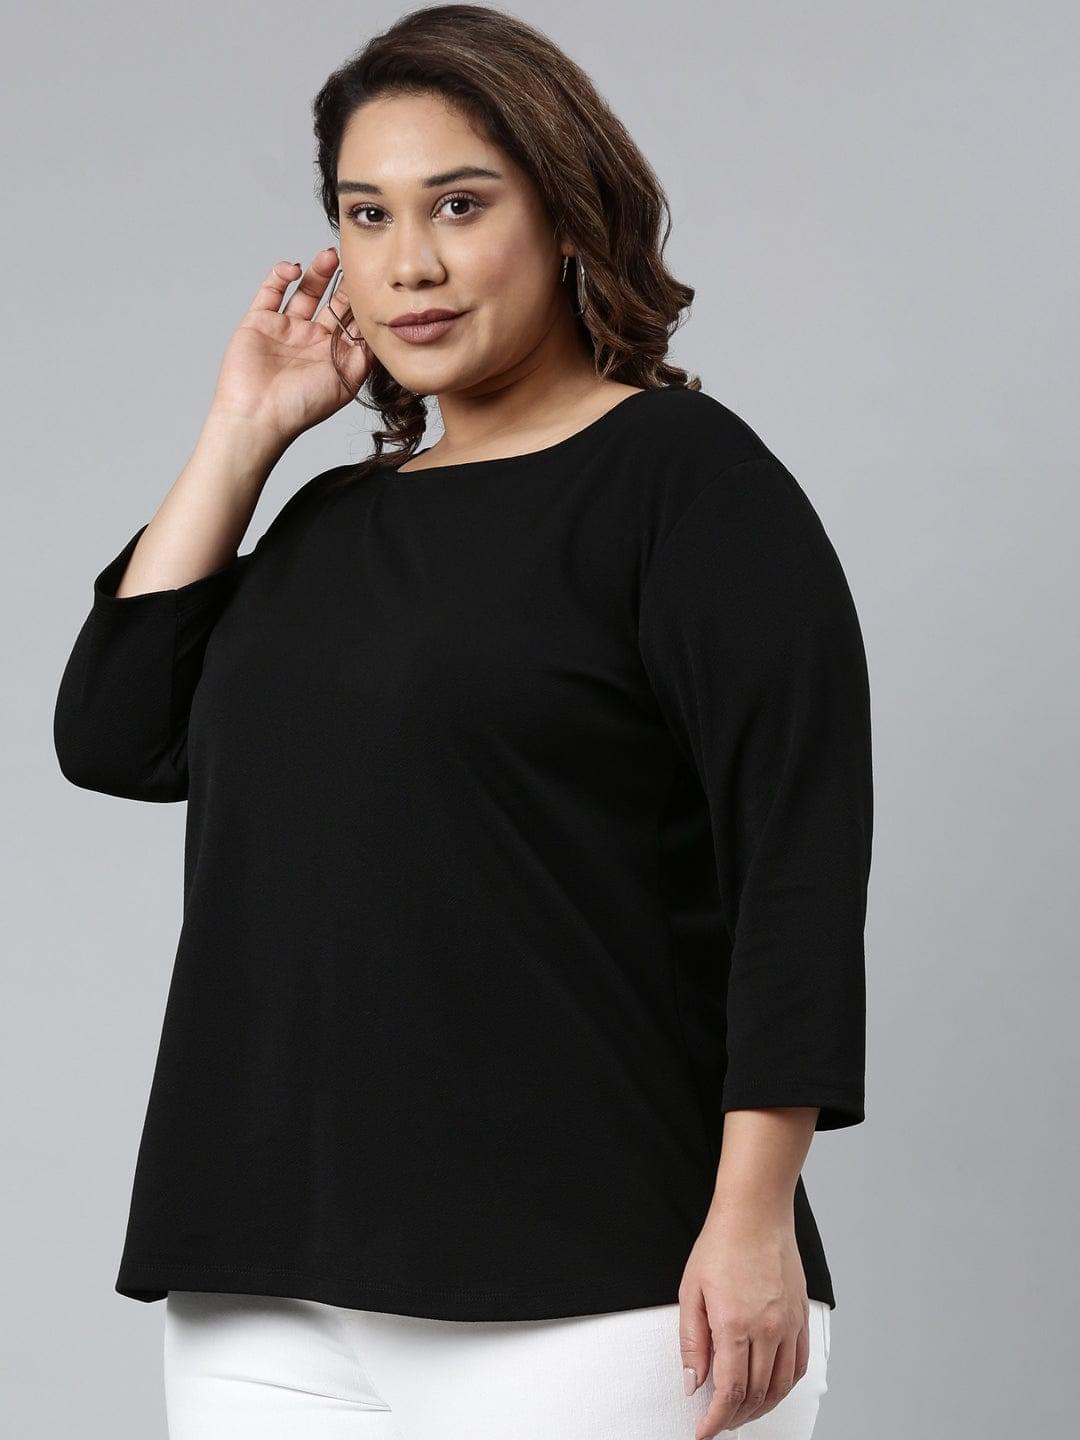 buy Black t-shirt of TheShaili comes with timeless black hue